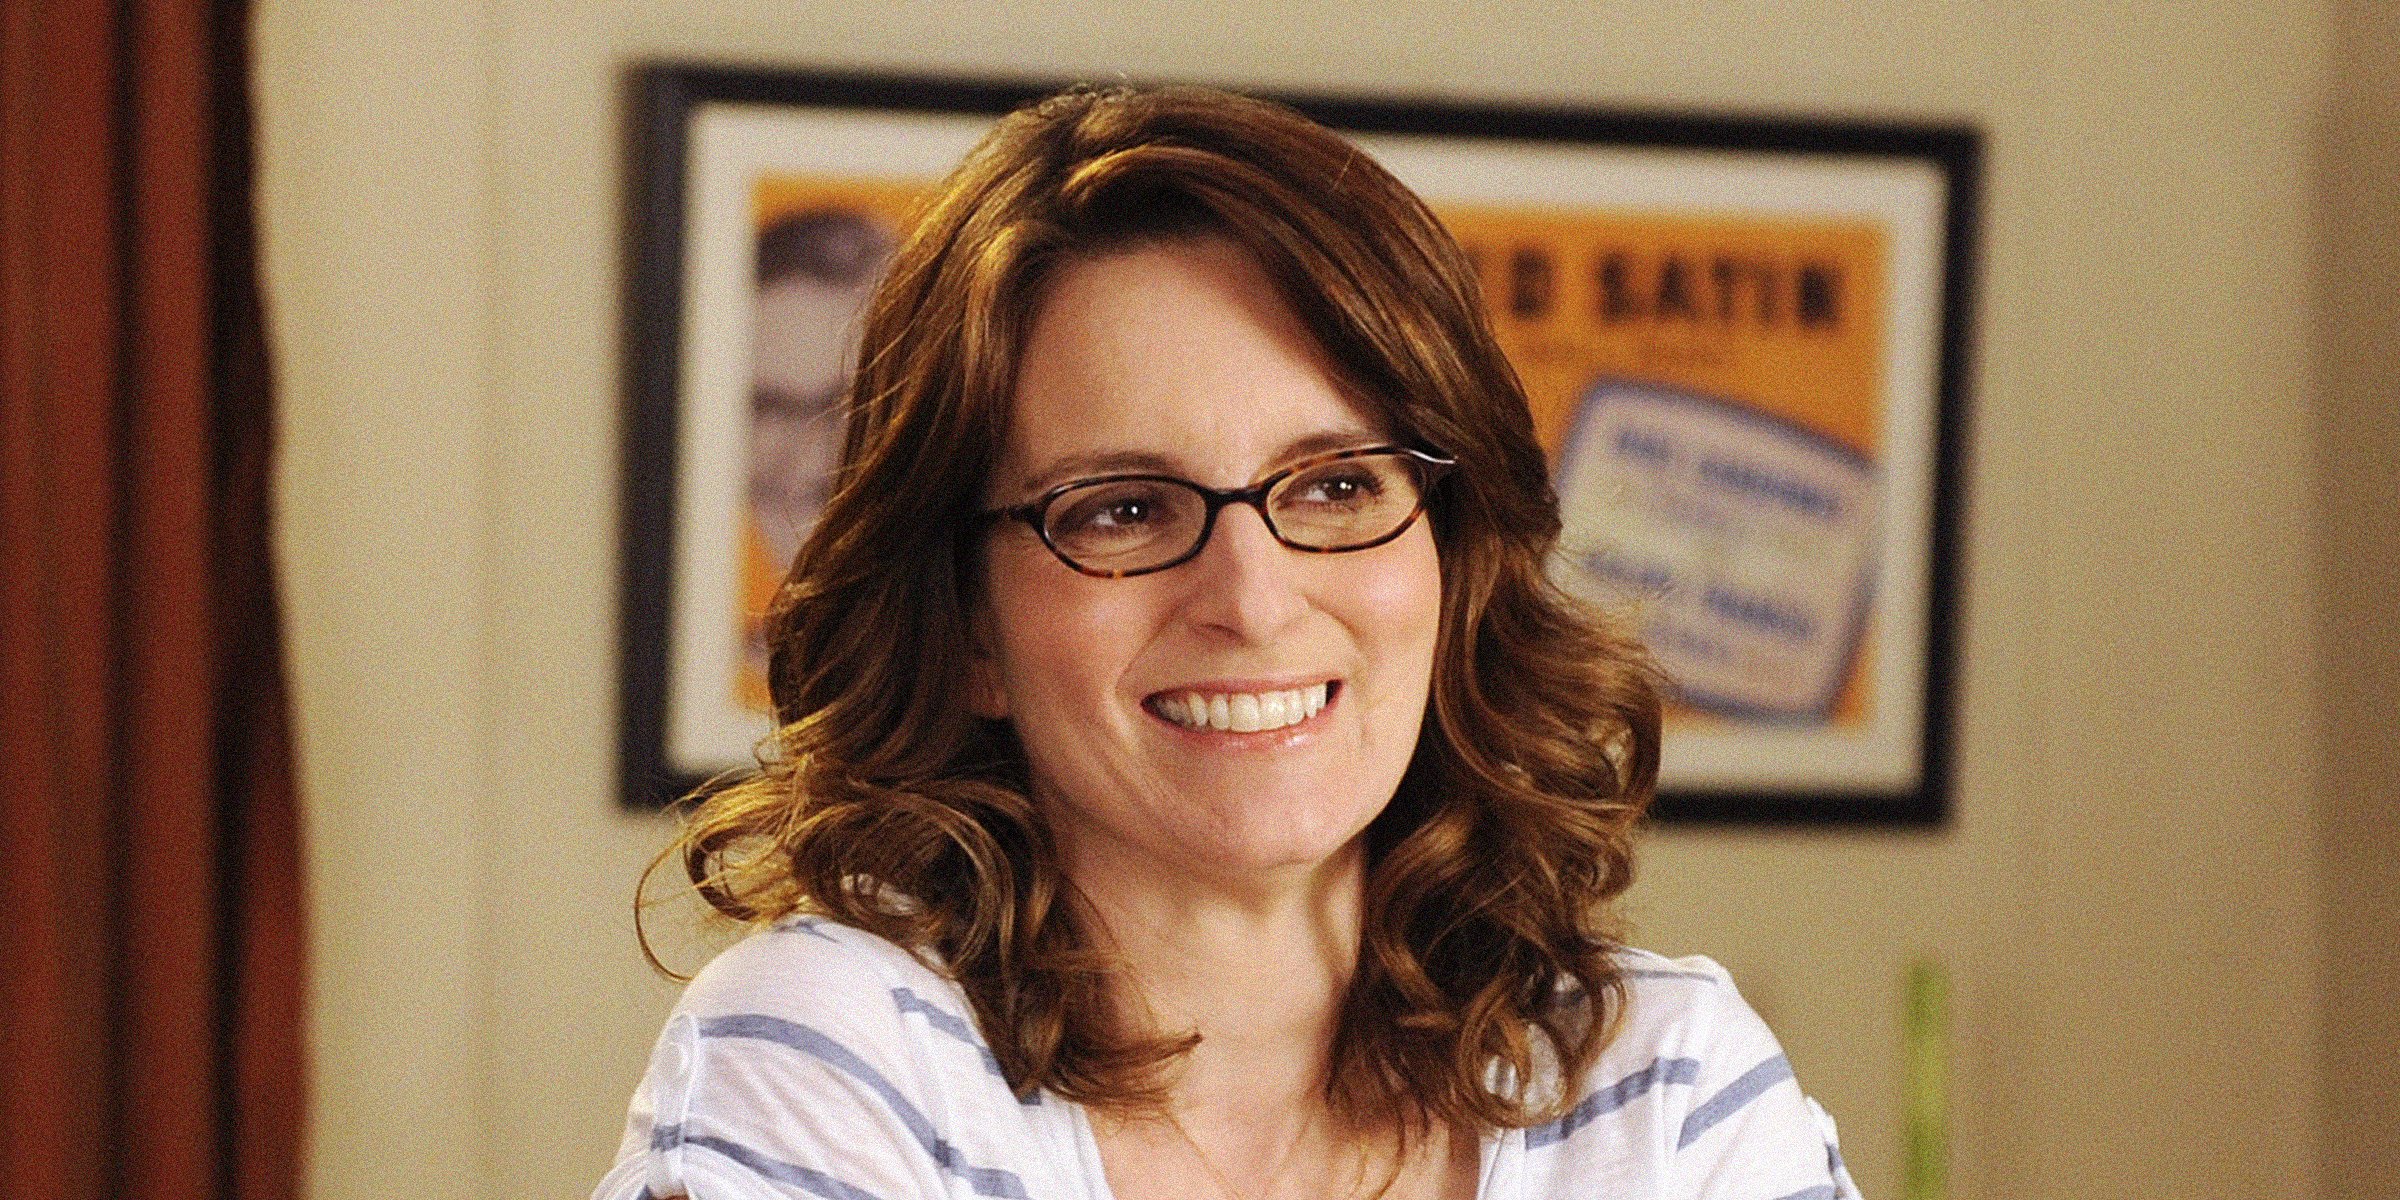 Tina Fey | Source: Getty Images